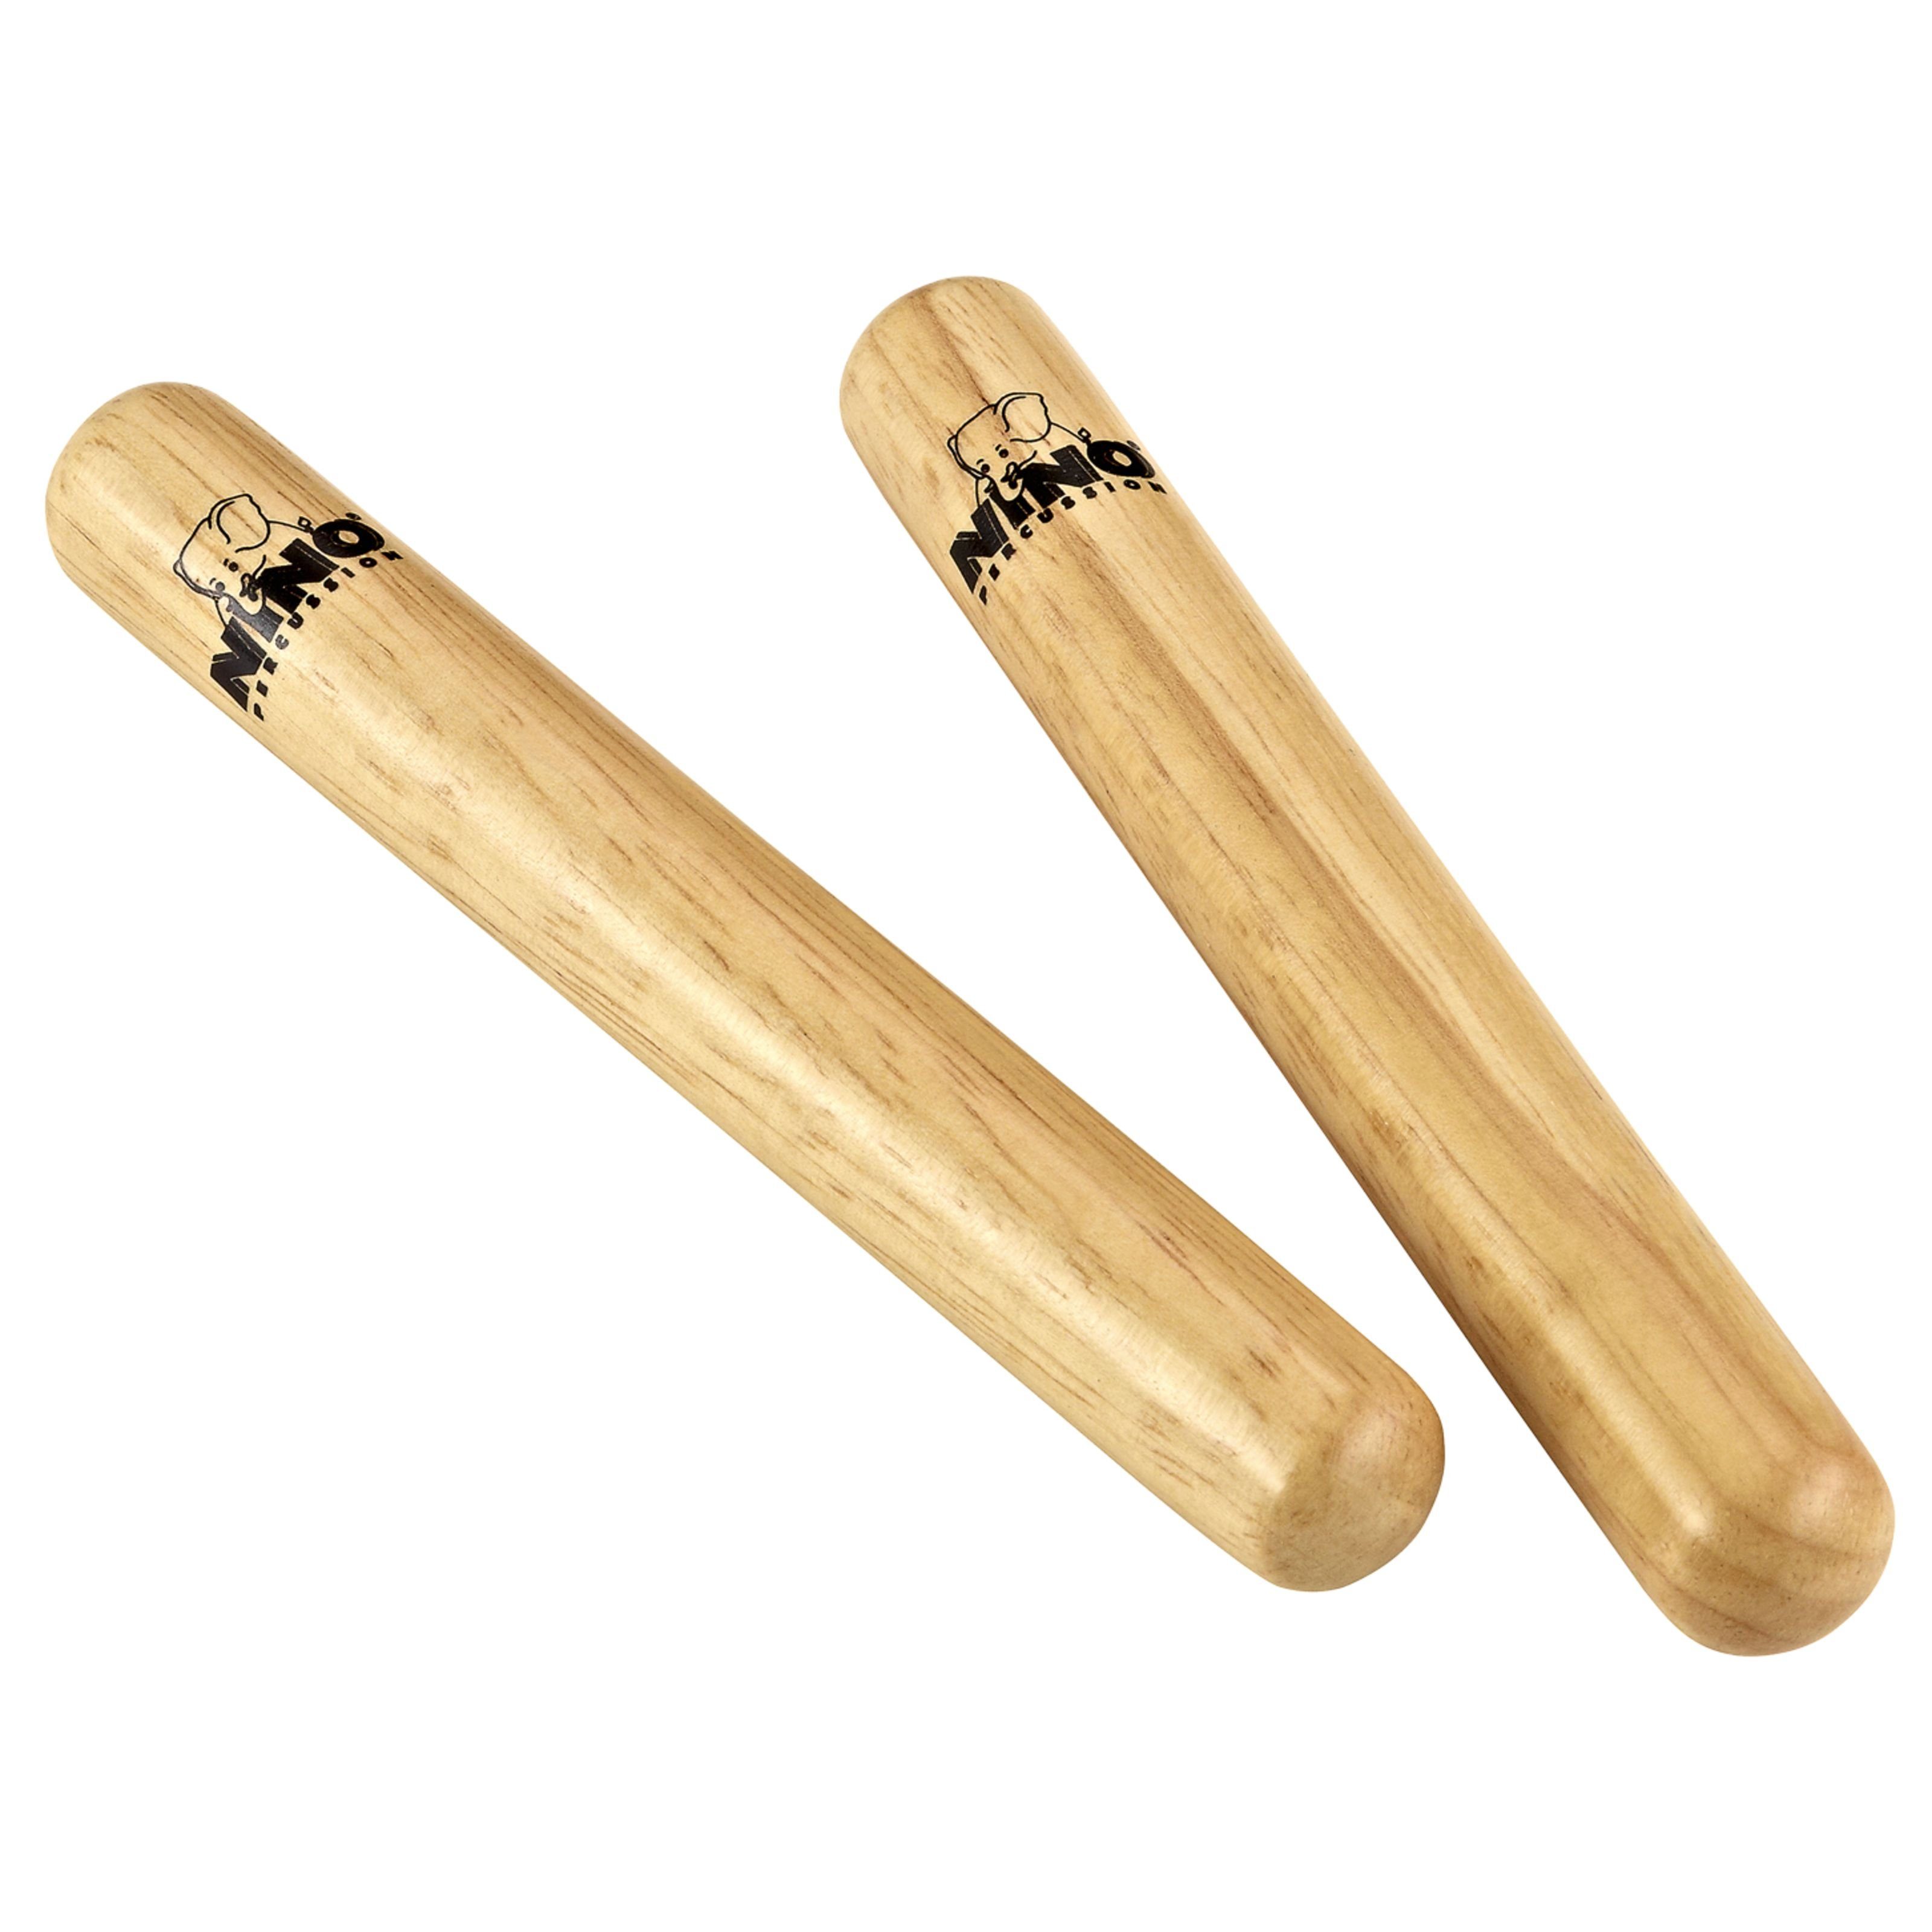 Meinl Percussion Claves, Percussion, Claves, Claves NINO574, large - Claves